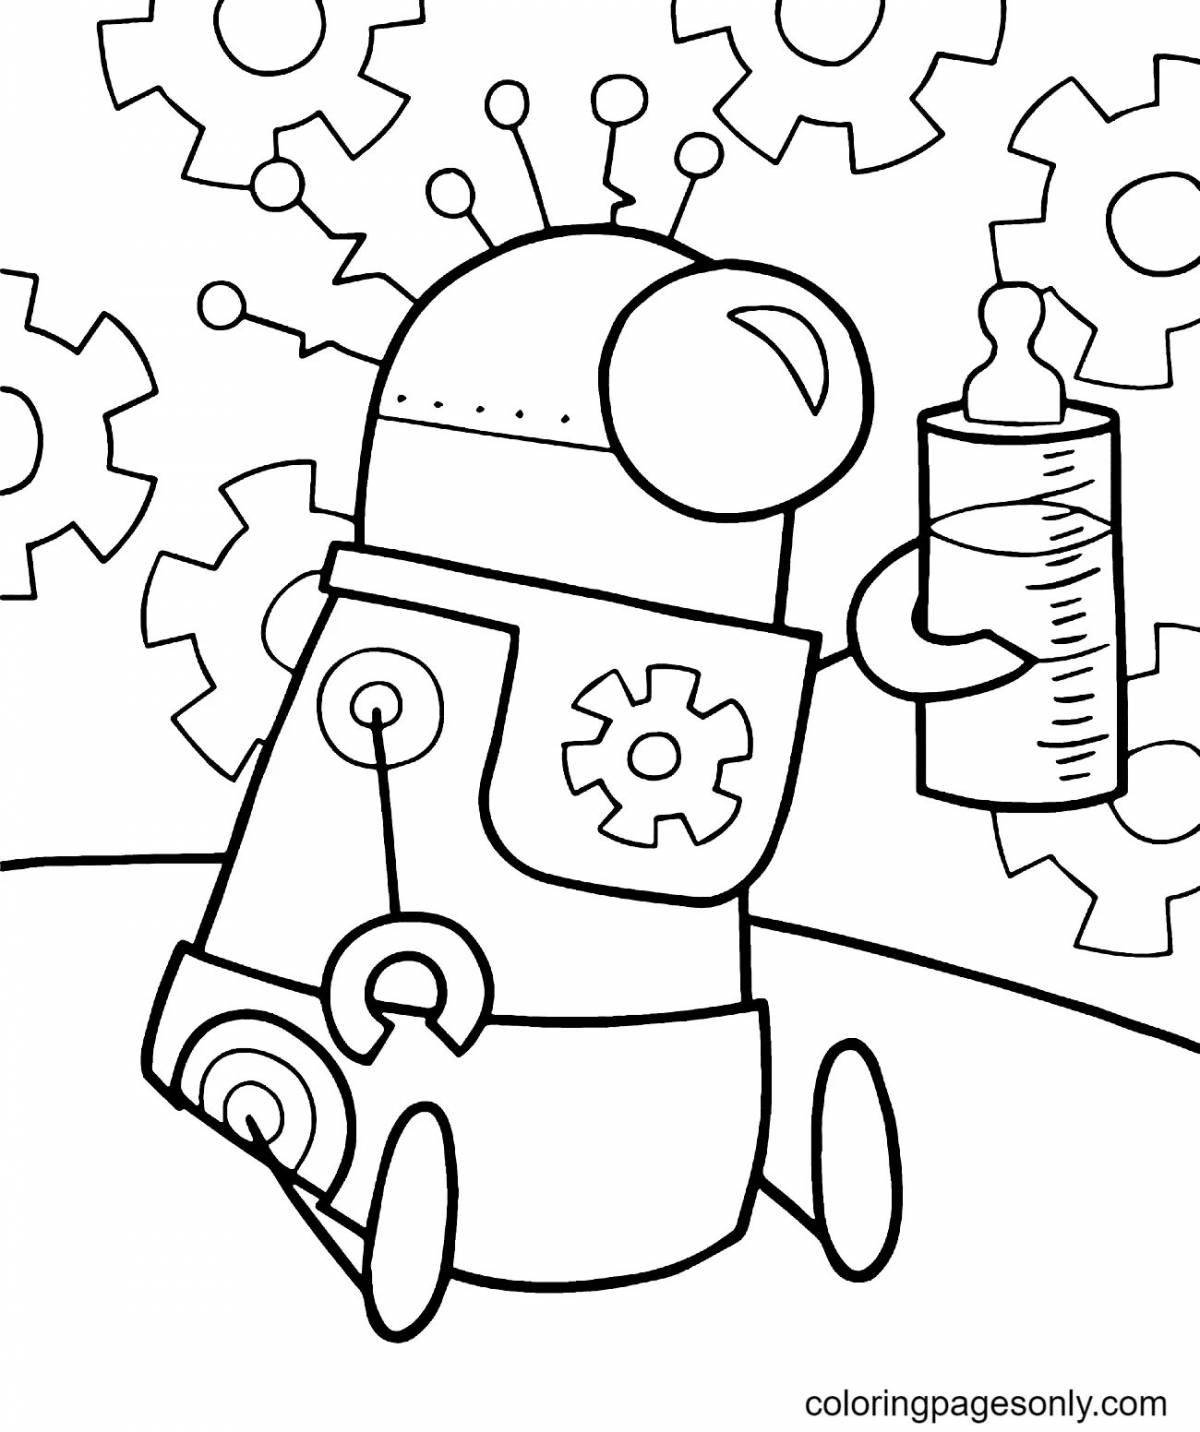 Incredible robot coloring pages for 5-7 year olds